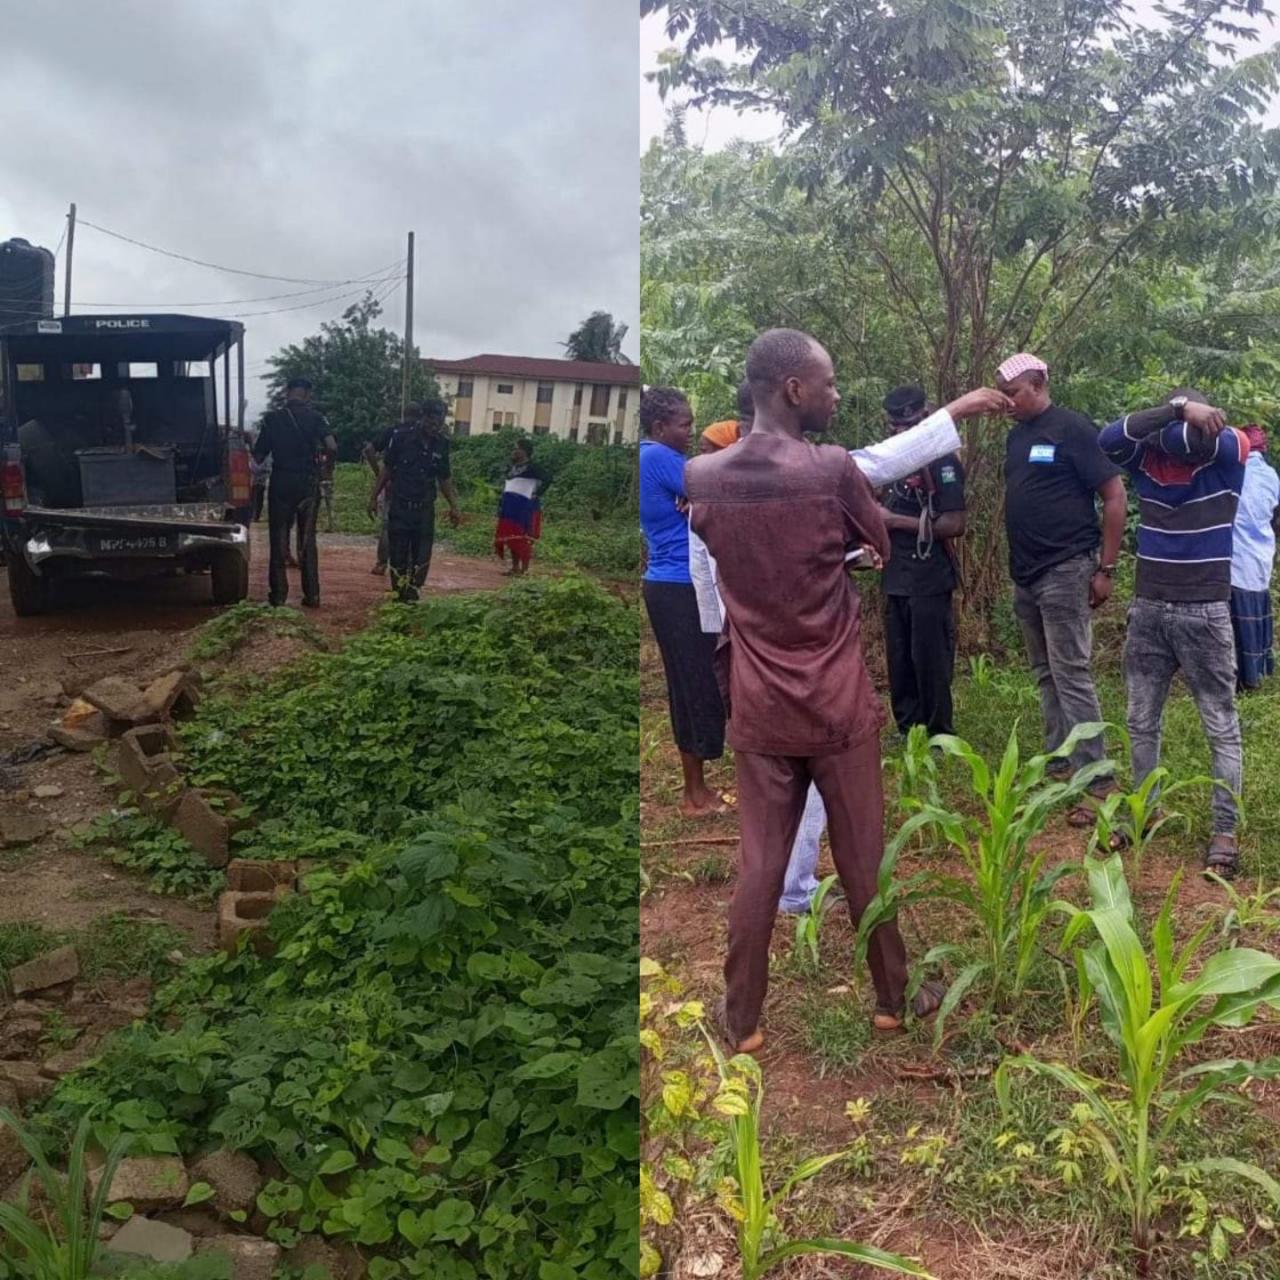 Suspected ritualists kill 65-year-old woman in Osun, pluck out her eyes